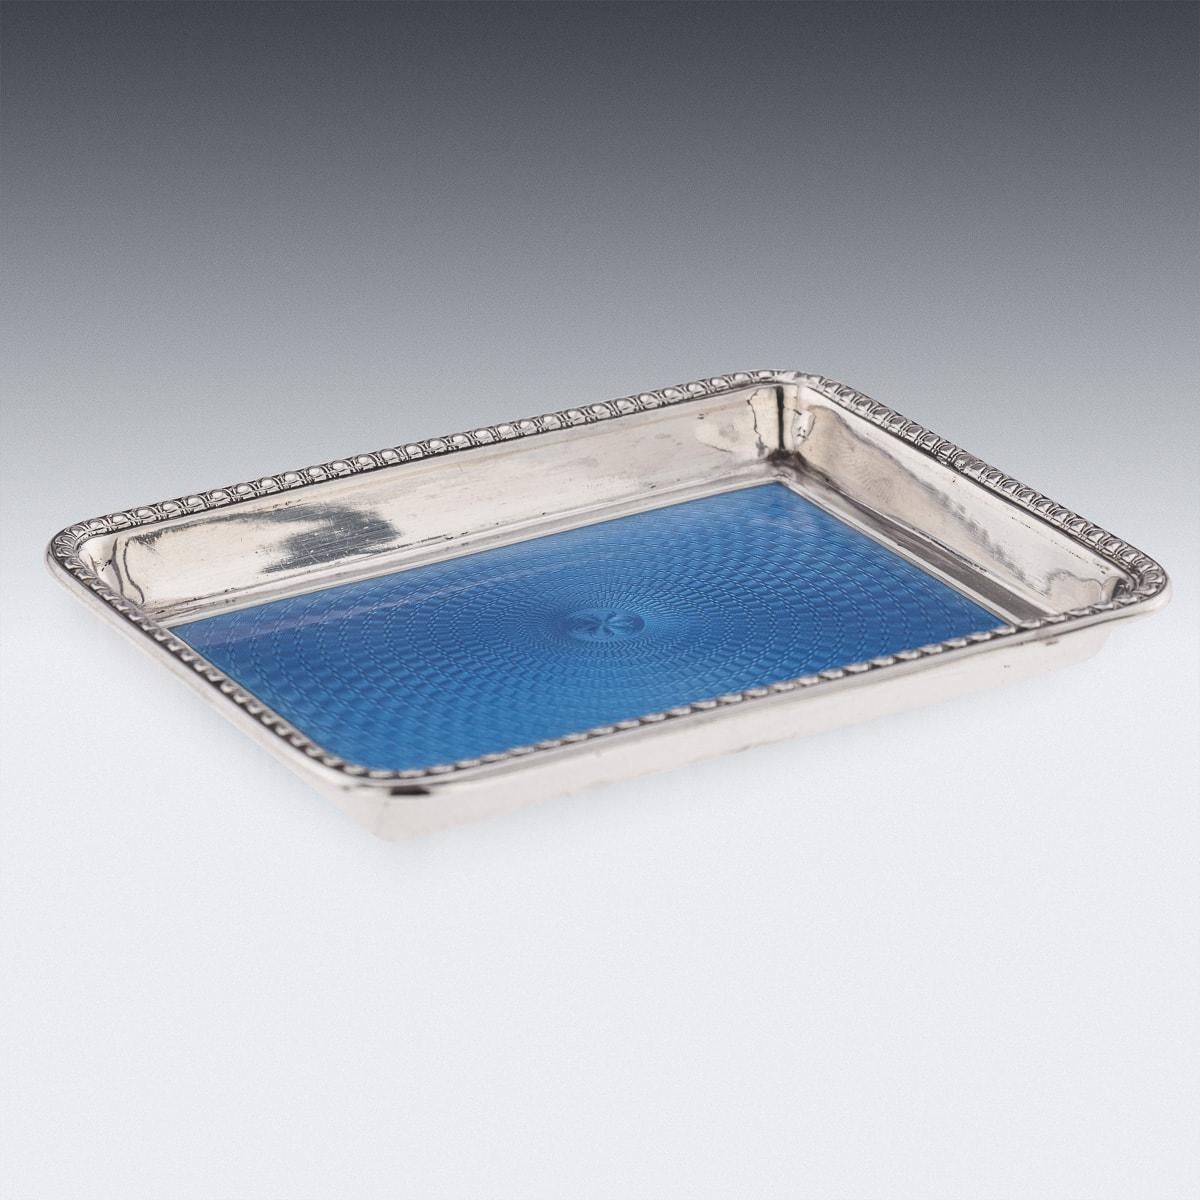 Antique early 20th Century Art Deco solid silver & guilloche enamel rectangular tray. Hallmarked English silver (925 standard), London, year 1919 (d), Maker William Walker. New Bond St.

CONDITION
In Great Condition - Wear expected with age. Please